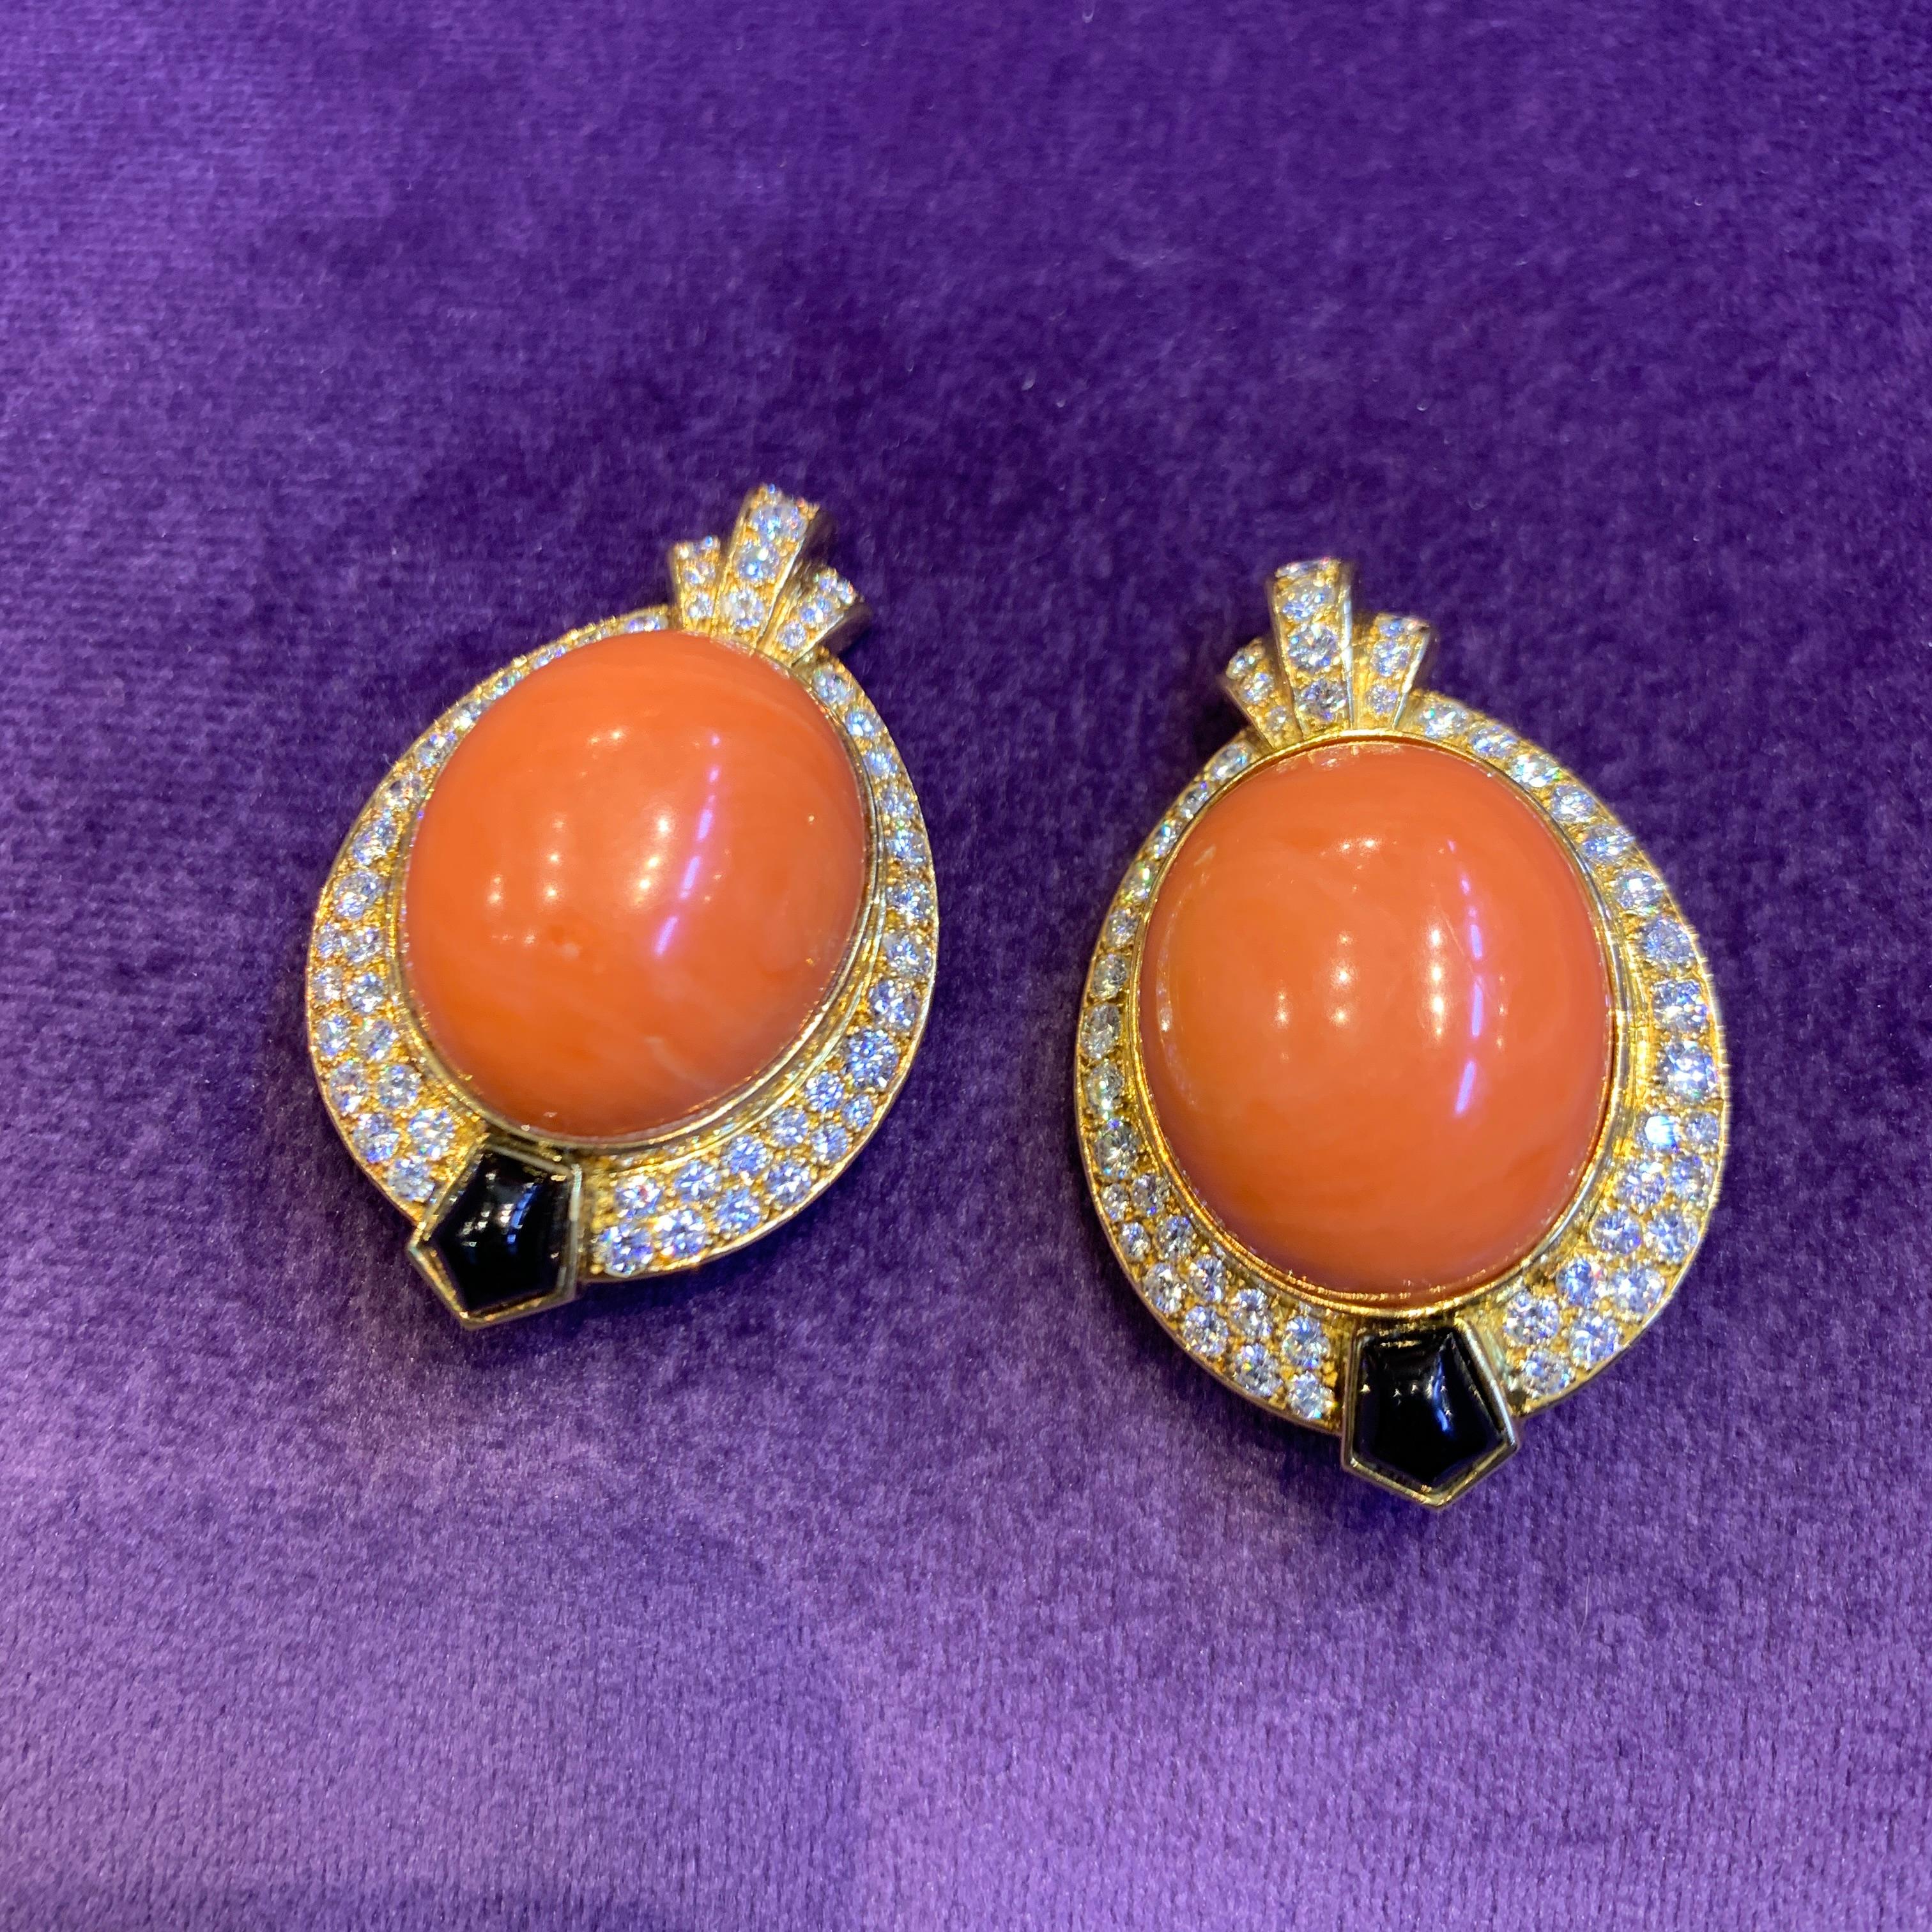 Cartier Egyptian Revival Coral Diamond & Onyx Earrings For Sale 4